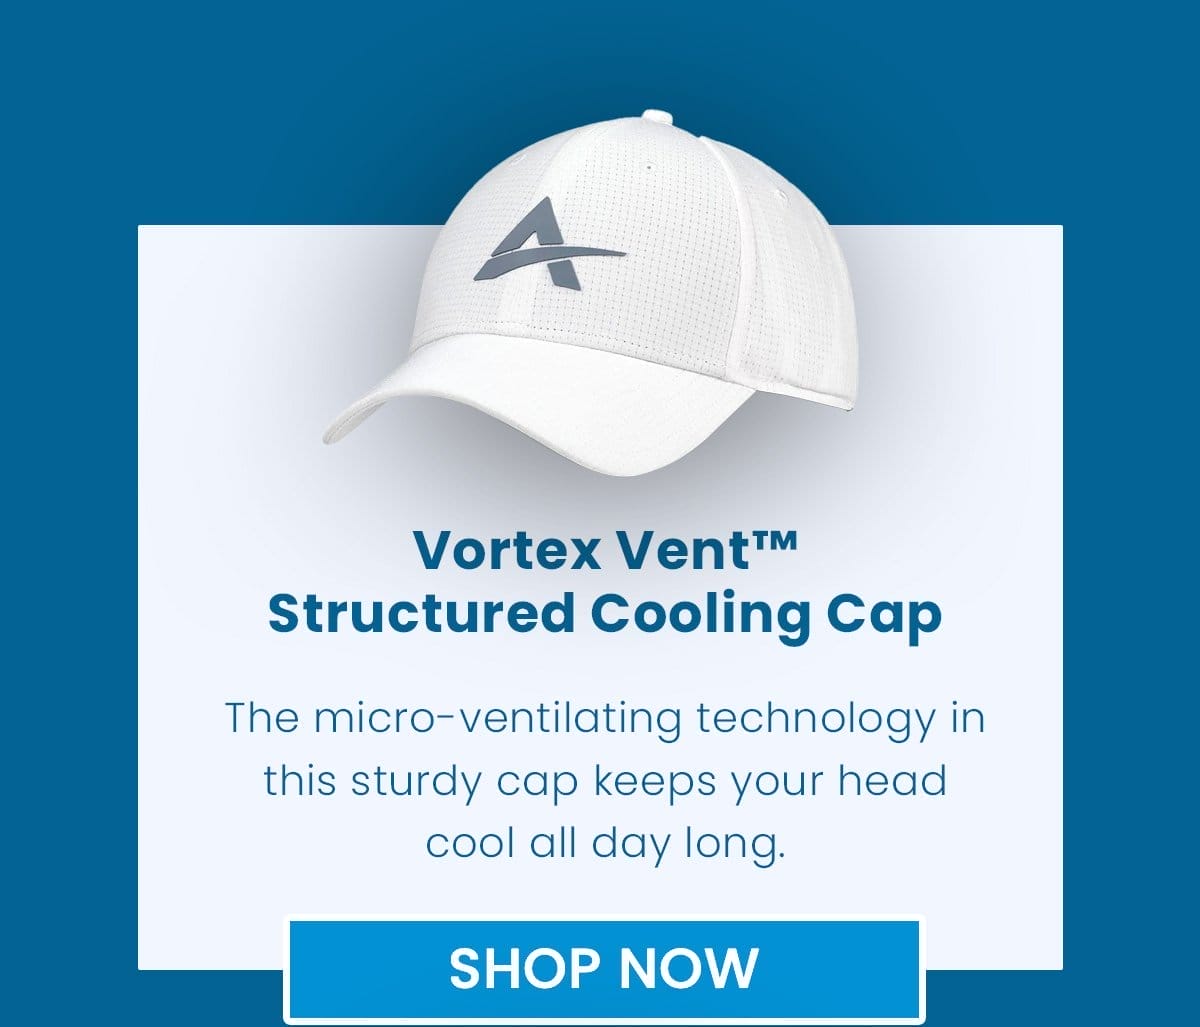 Vortex Vent™ Structured Cooling Cap The micro-ventilating technology in this sturdy cap keeps your head cool all day long